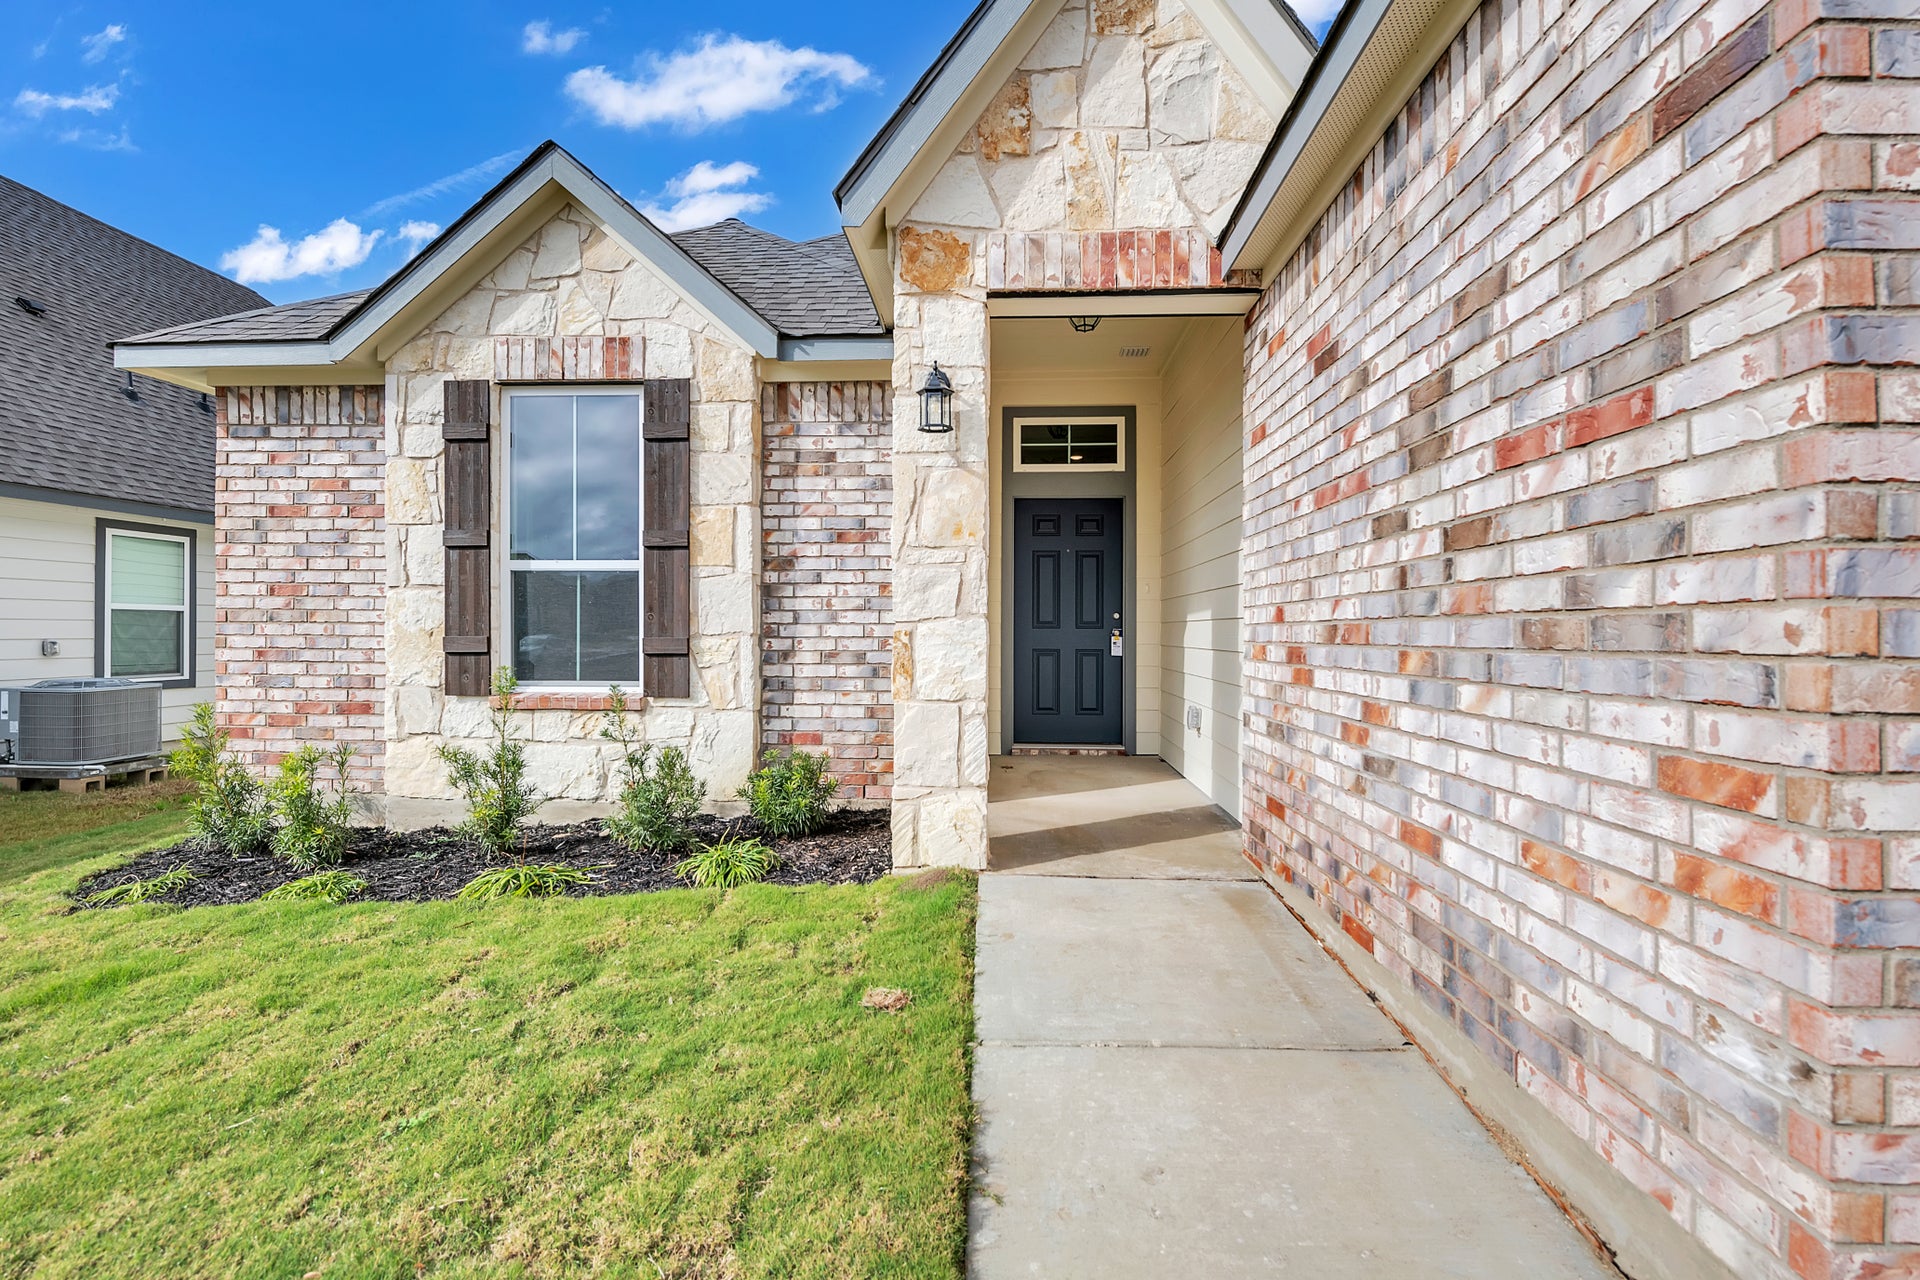 4br New Home in Killeen, TX